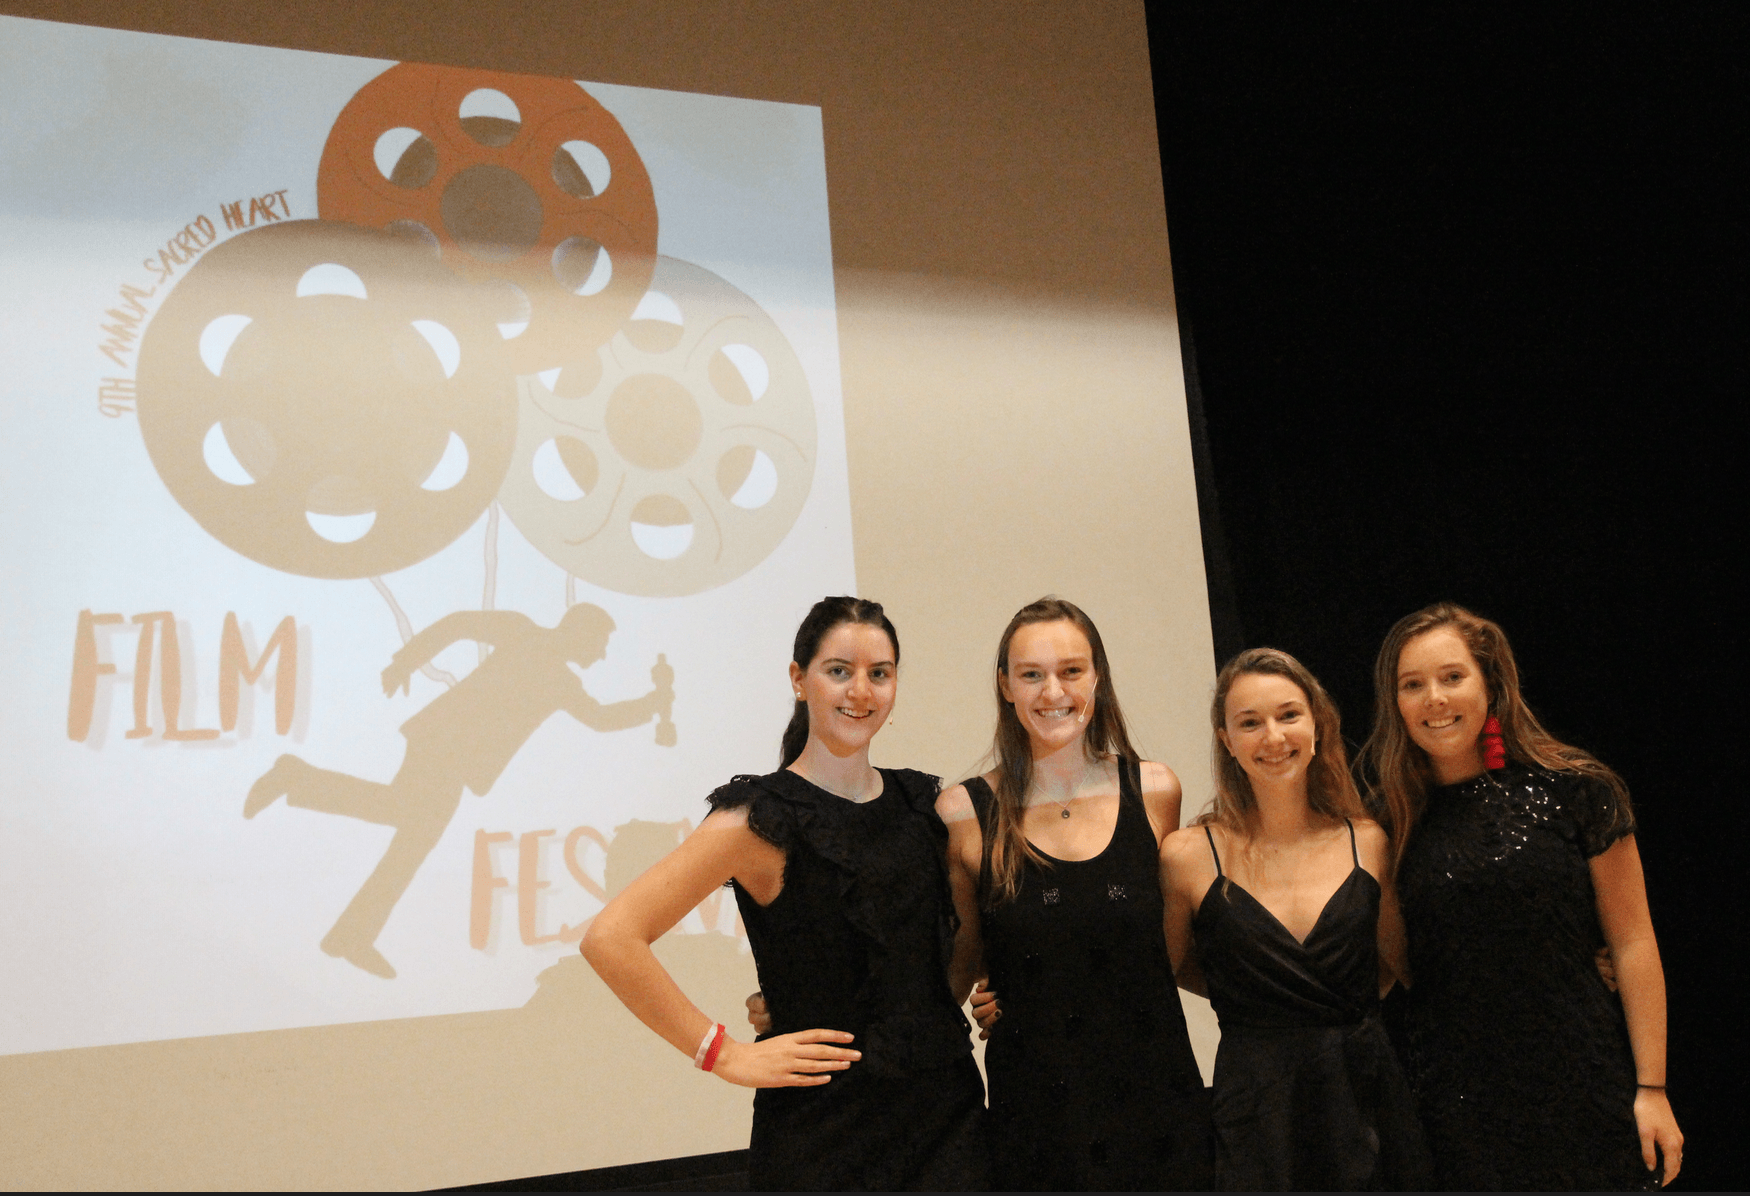 Jackie Shannon, Lily Lemkau, Sophia Brusco and Kaitlin Reilly at rehearsal for Sacred Heart Greenwich's 9th annual film festival. Photo: Leslie Yager 